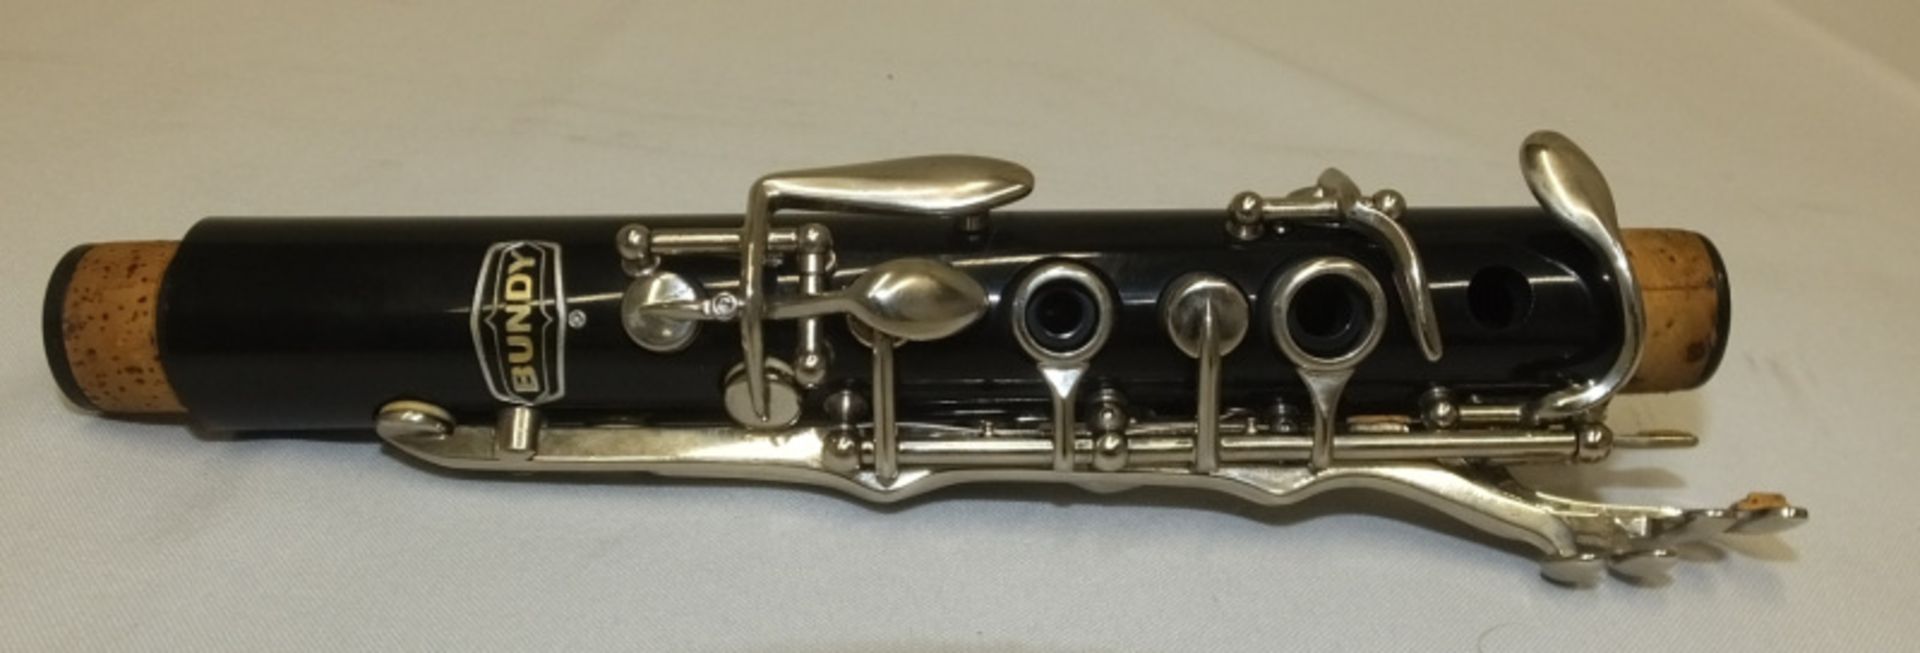 Bundy Resonite Clarinet in case - serial number S243328 - Please check photos carefully - Image 3 of 19